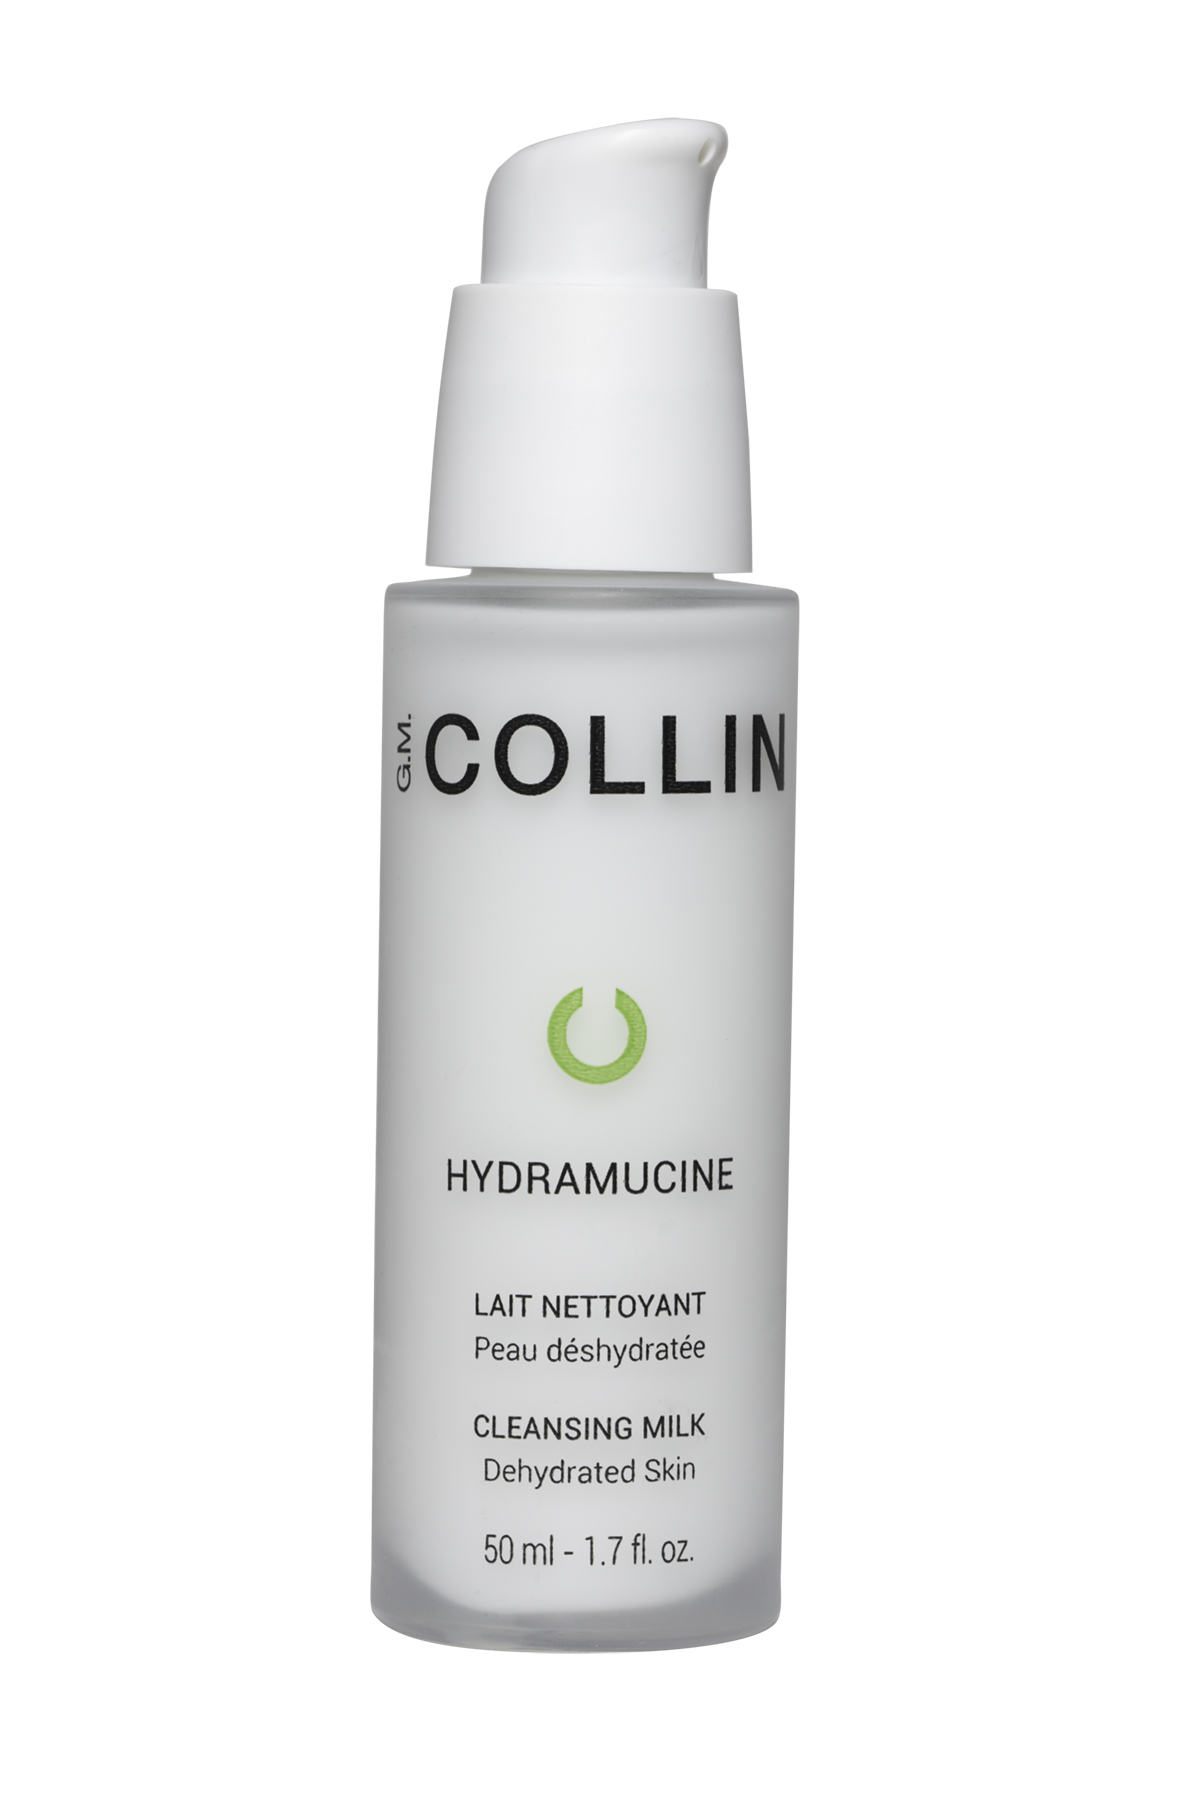 HYDRAMUCINE CLEANSING MILK - DISCOVERY SIZE